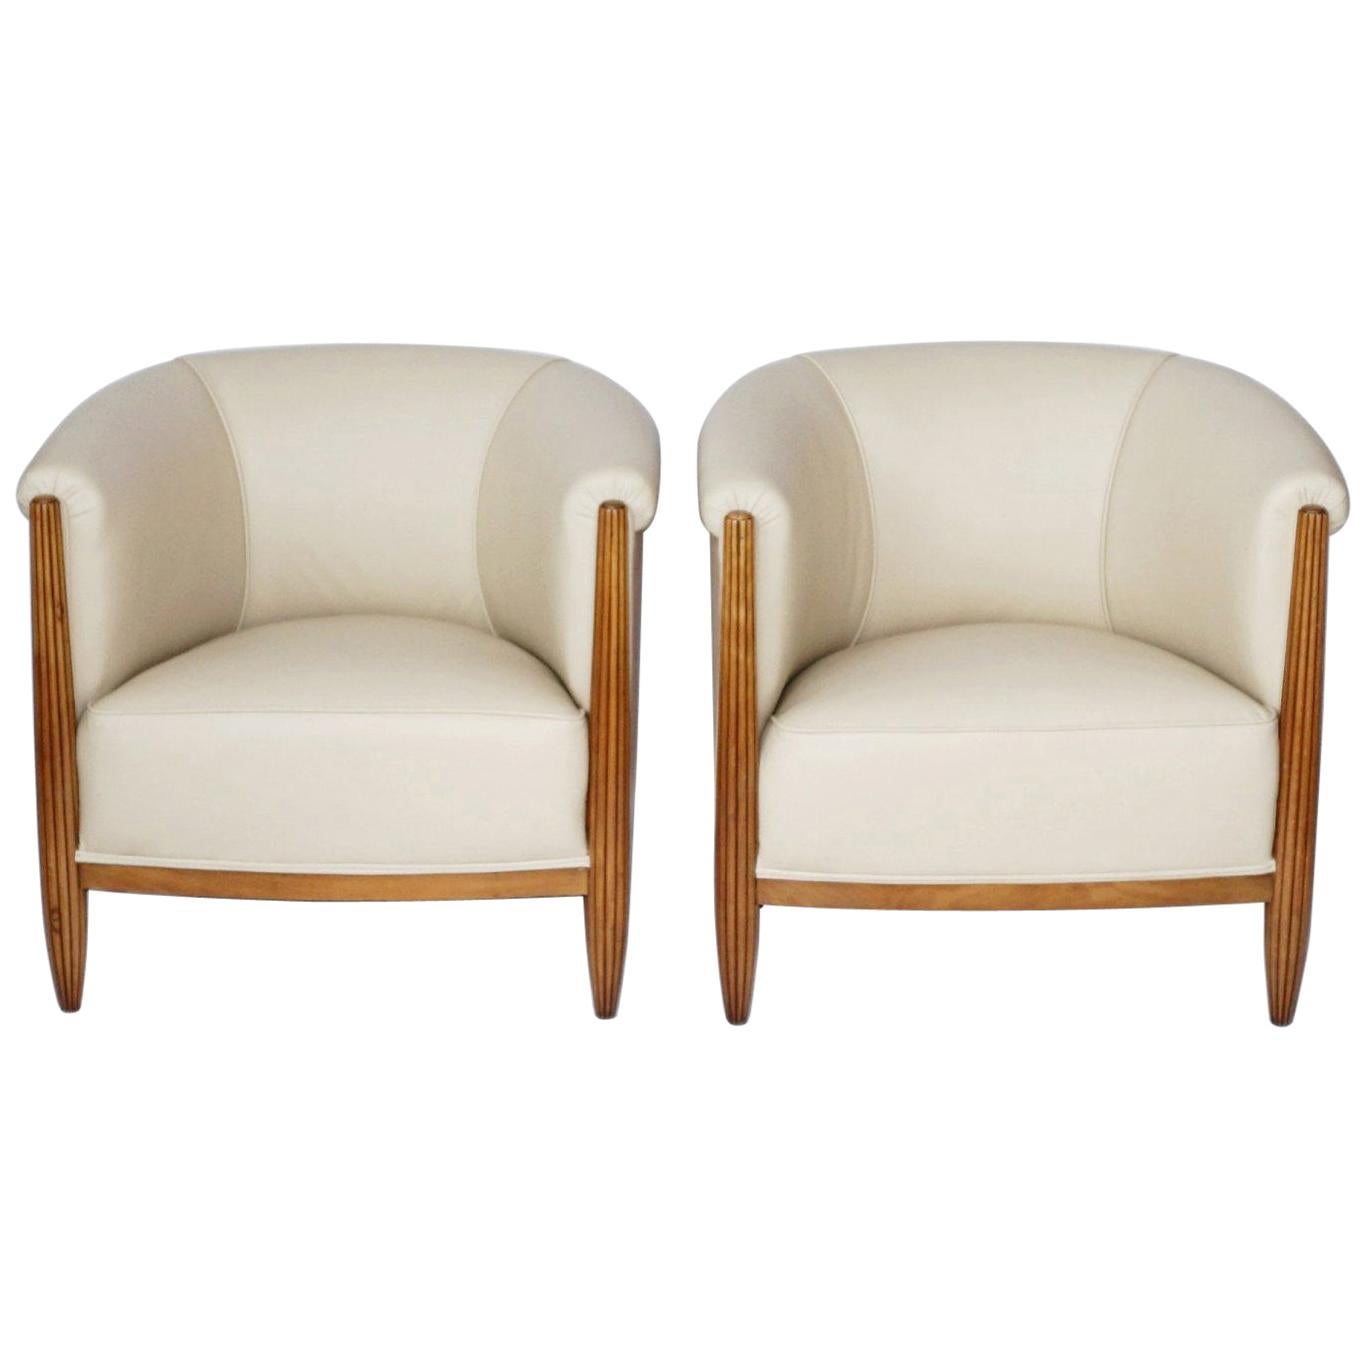 Pair of Art Deco Tub Chairs Attributed to Paul Follot